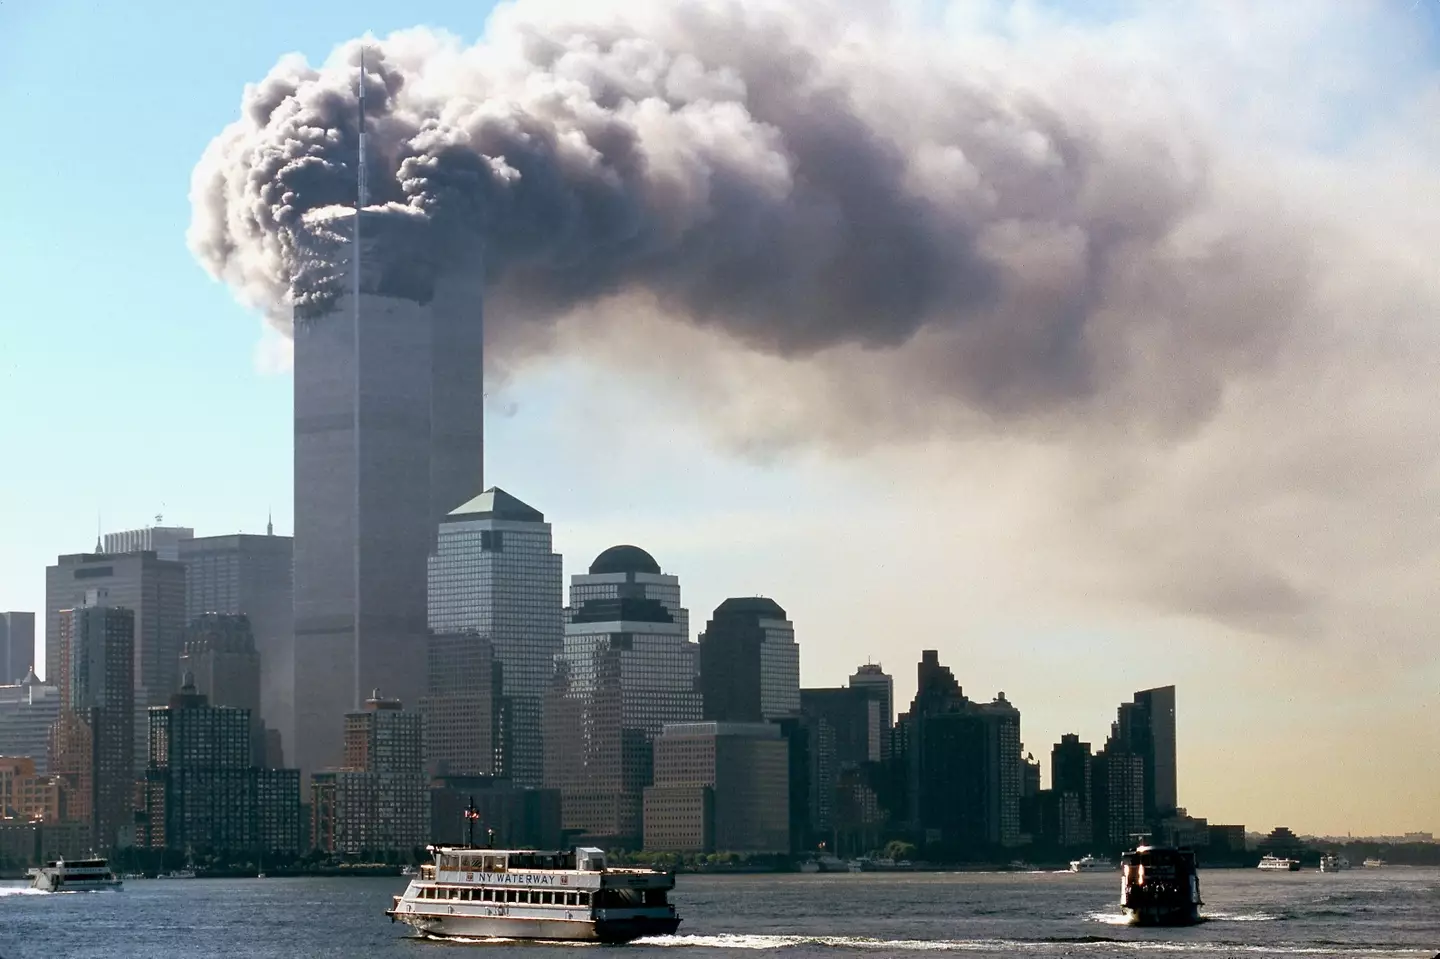 The September 11th attacks shocked and horrified the world (